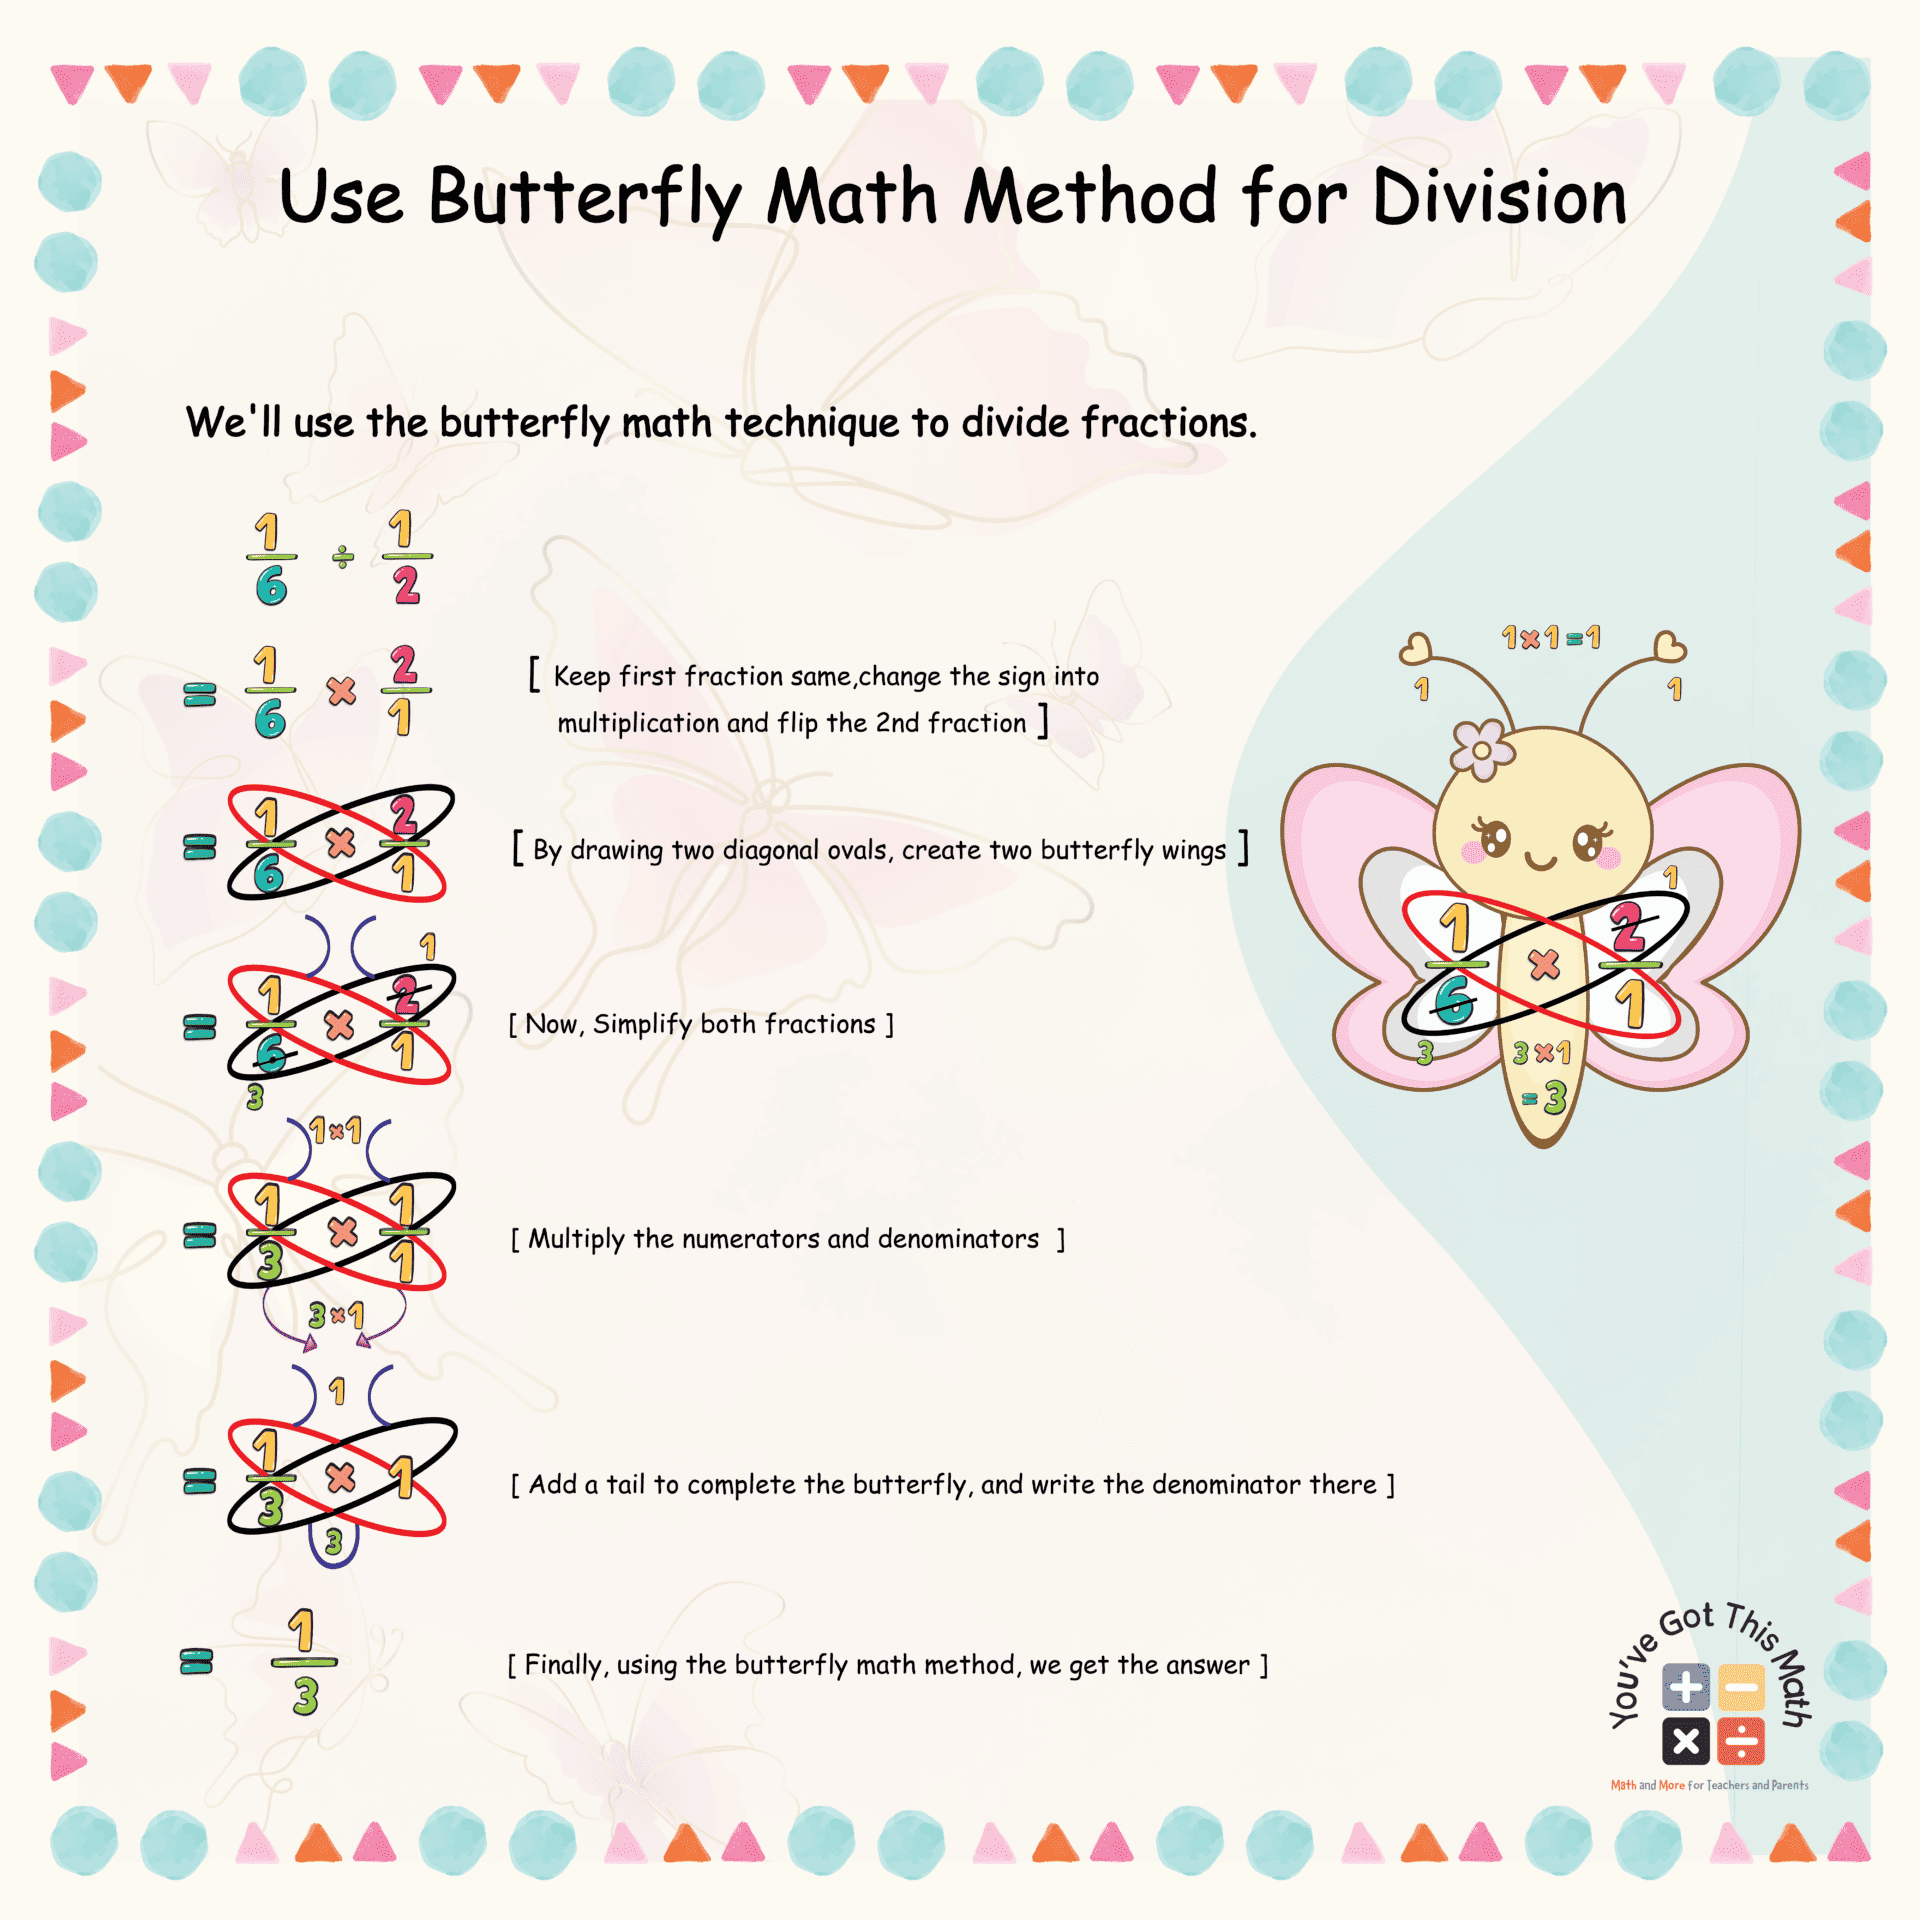 Use Butterfly Math Method for Division